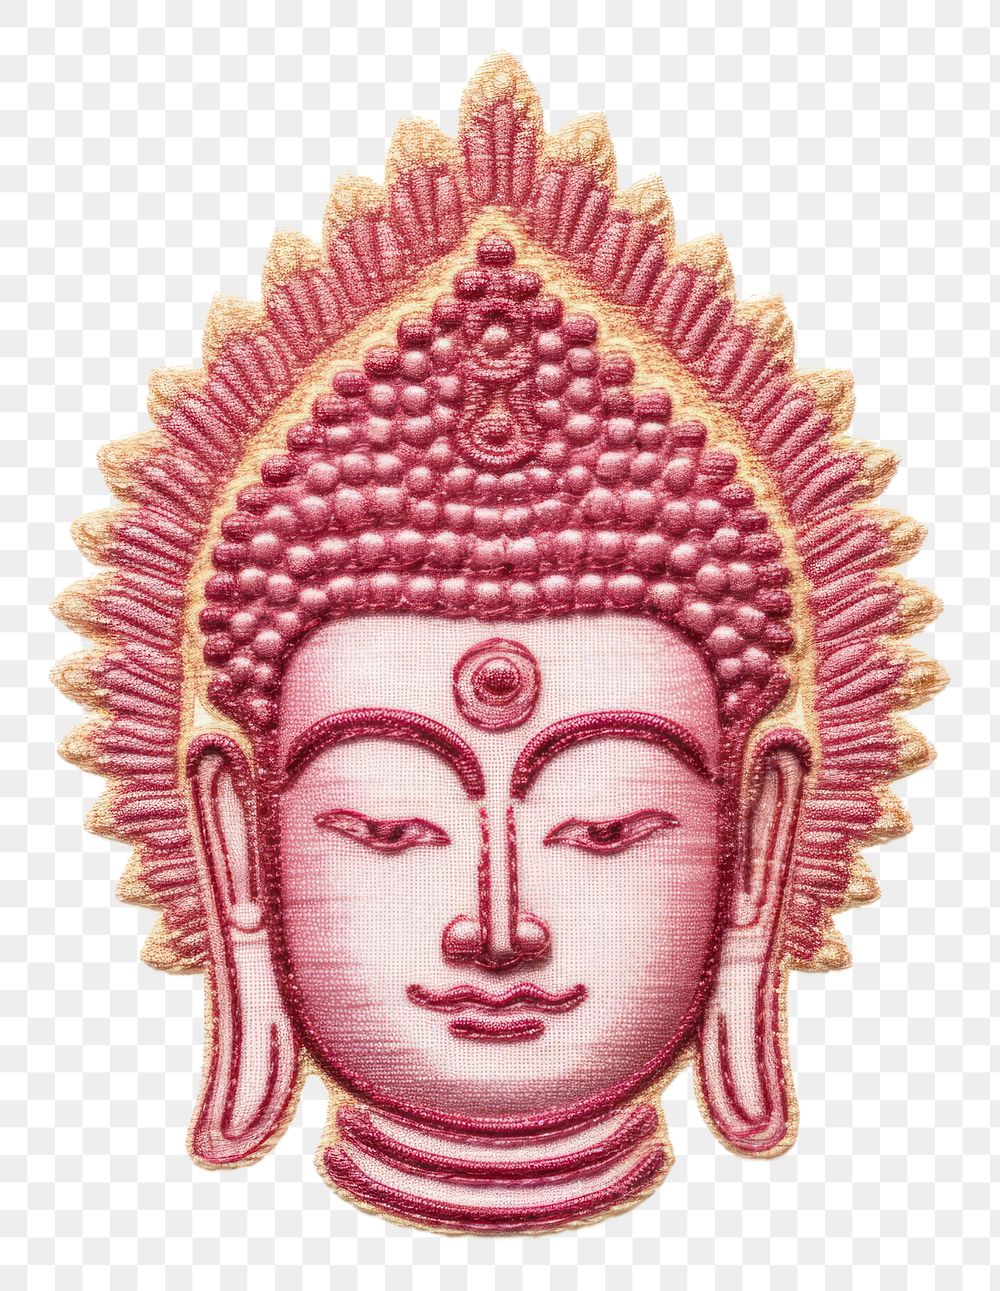 PNG  Buddha head in embroidery style art representation spirituality.